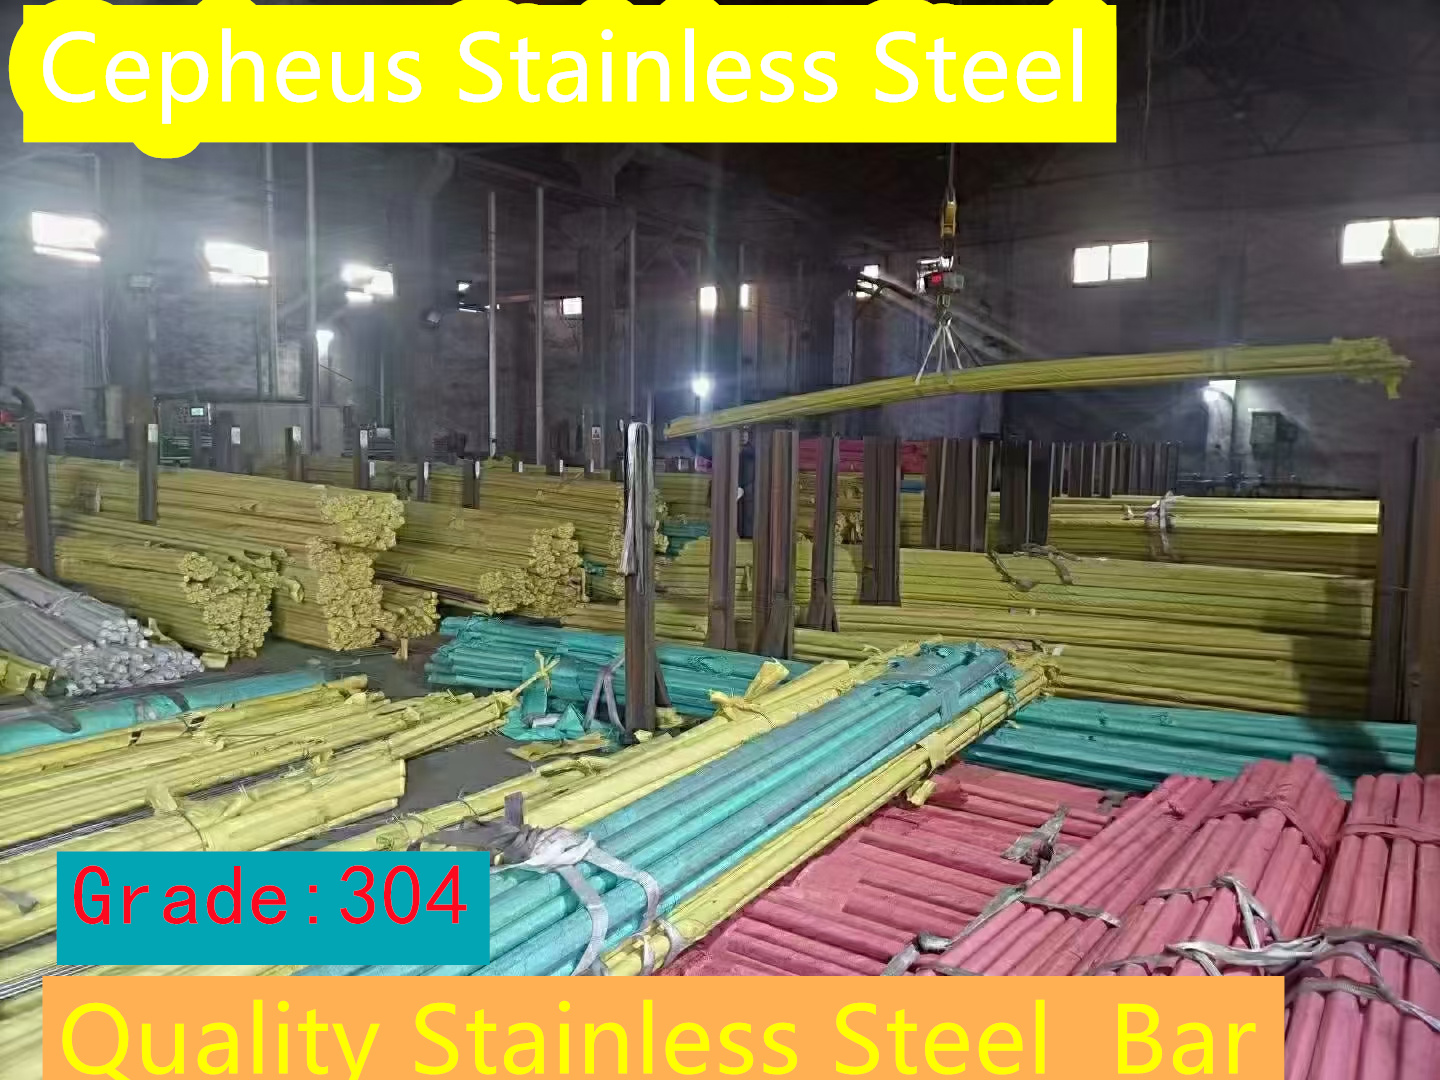 Stainless Steel 304 Round Bar | AMS 5639 Rod supplier